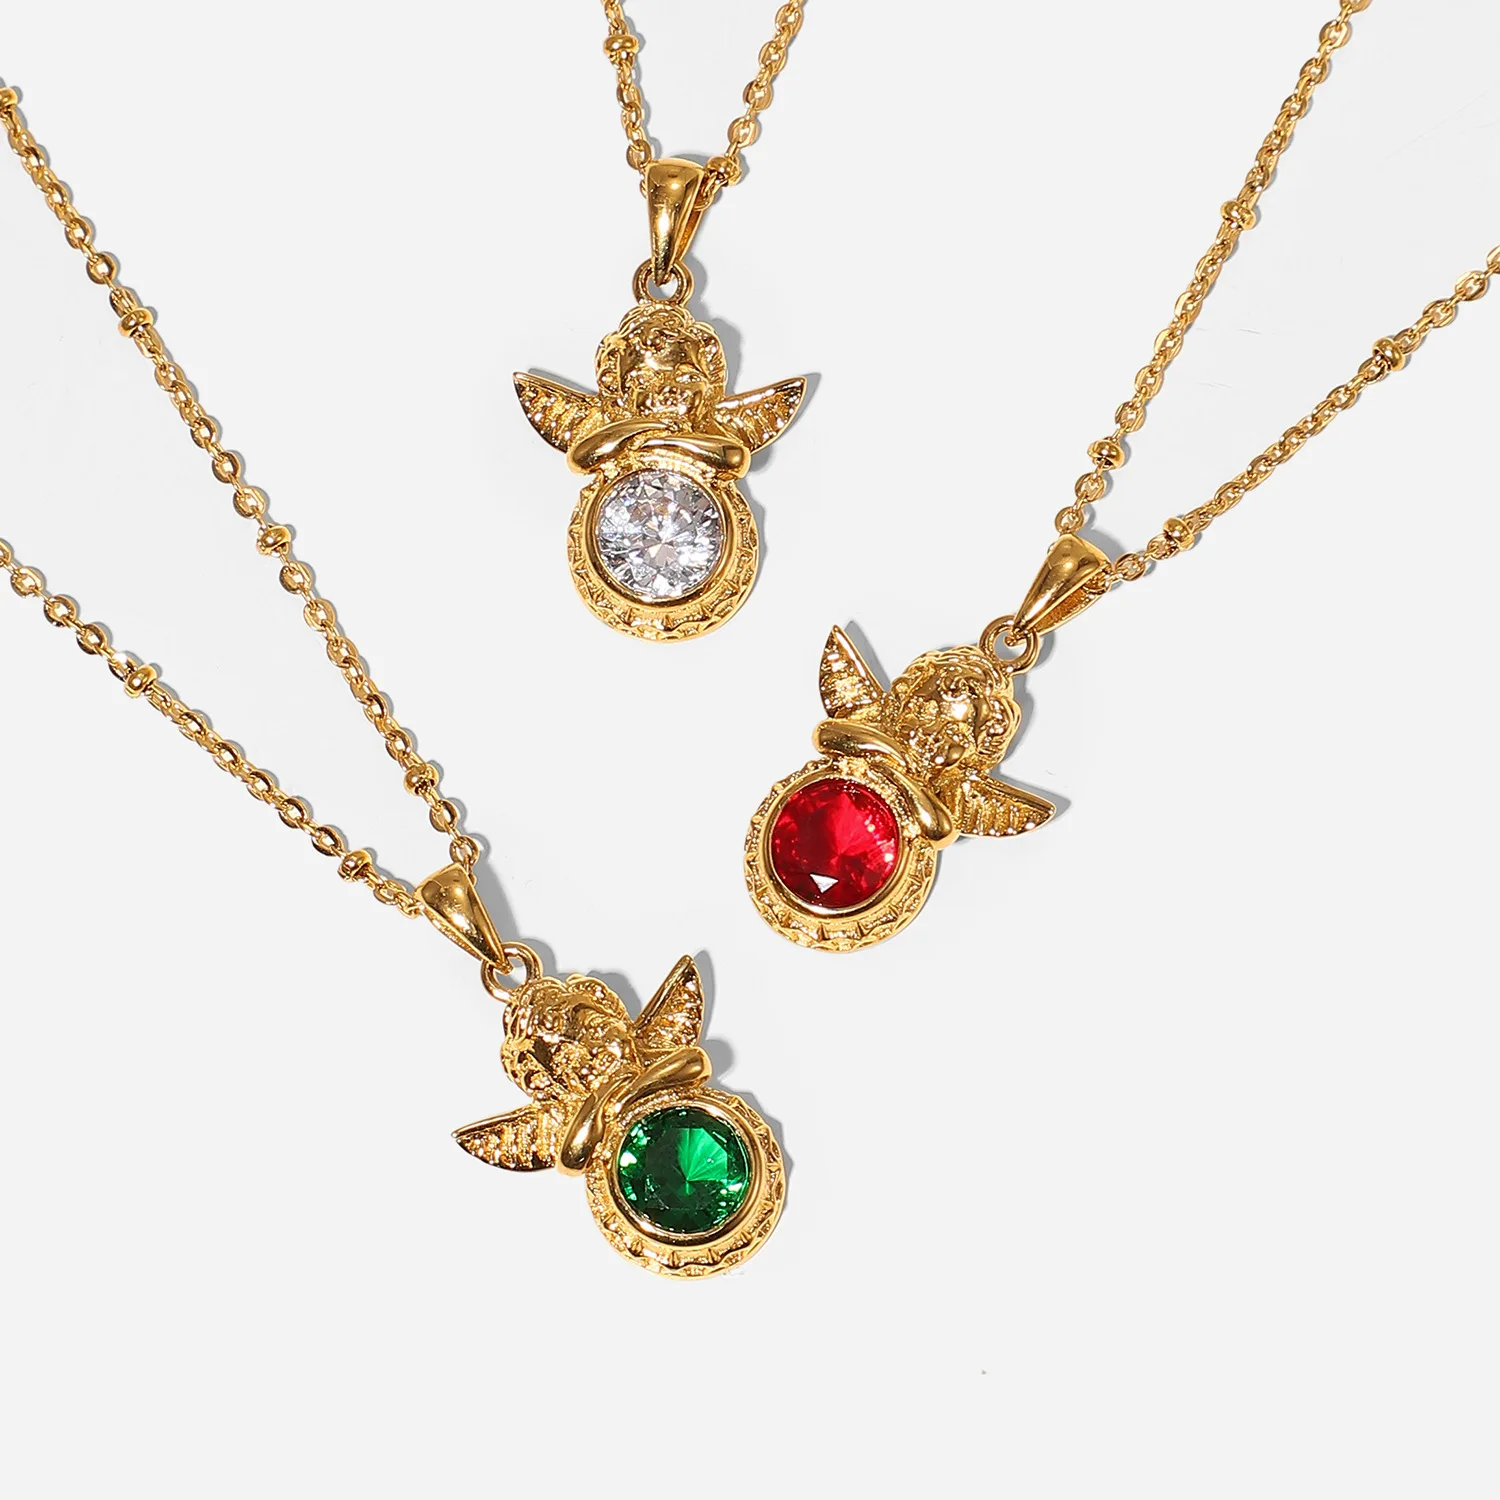 CARLIDANA Cute Red Charm Crystal Angel Pendant Necklace Choker Non Tarnish Jewelry Gold Color Stainless Steel Necklace for Women